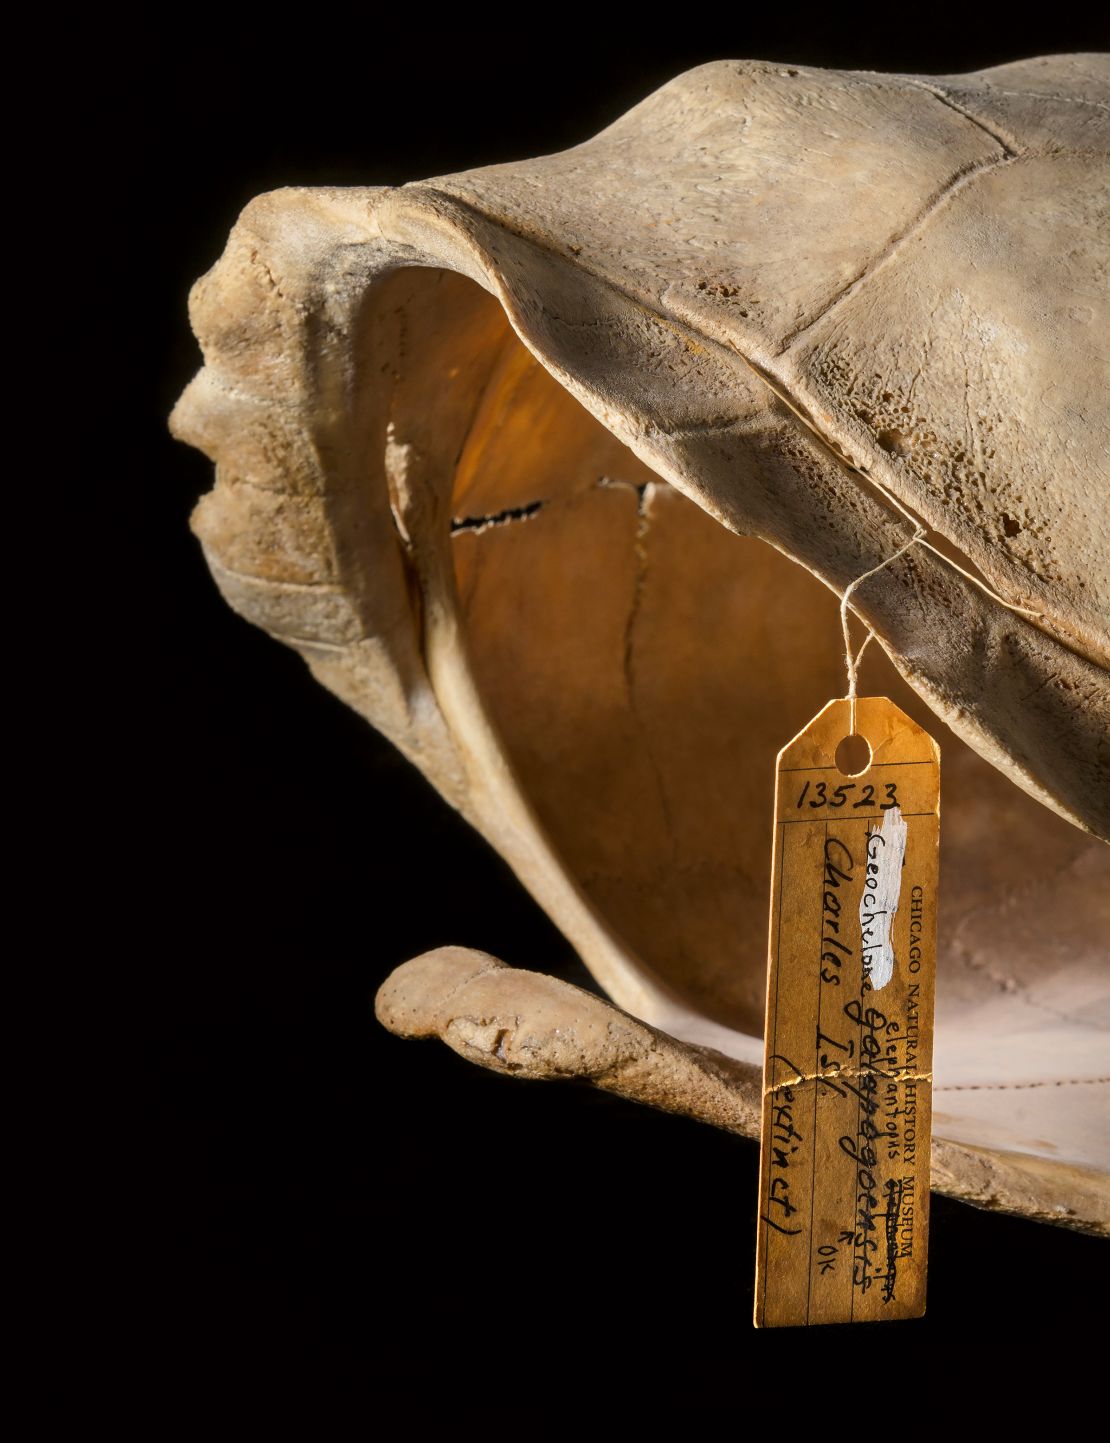 A detail of a Floreana giant tortoise specimen from the Field Museum's collection is shown. The species was hunted to extinction by 1850. 